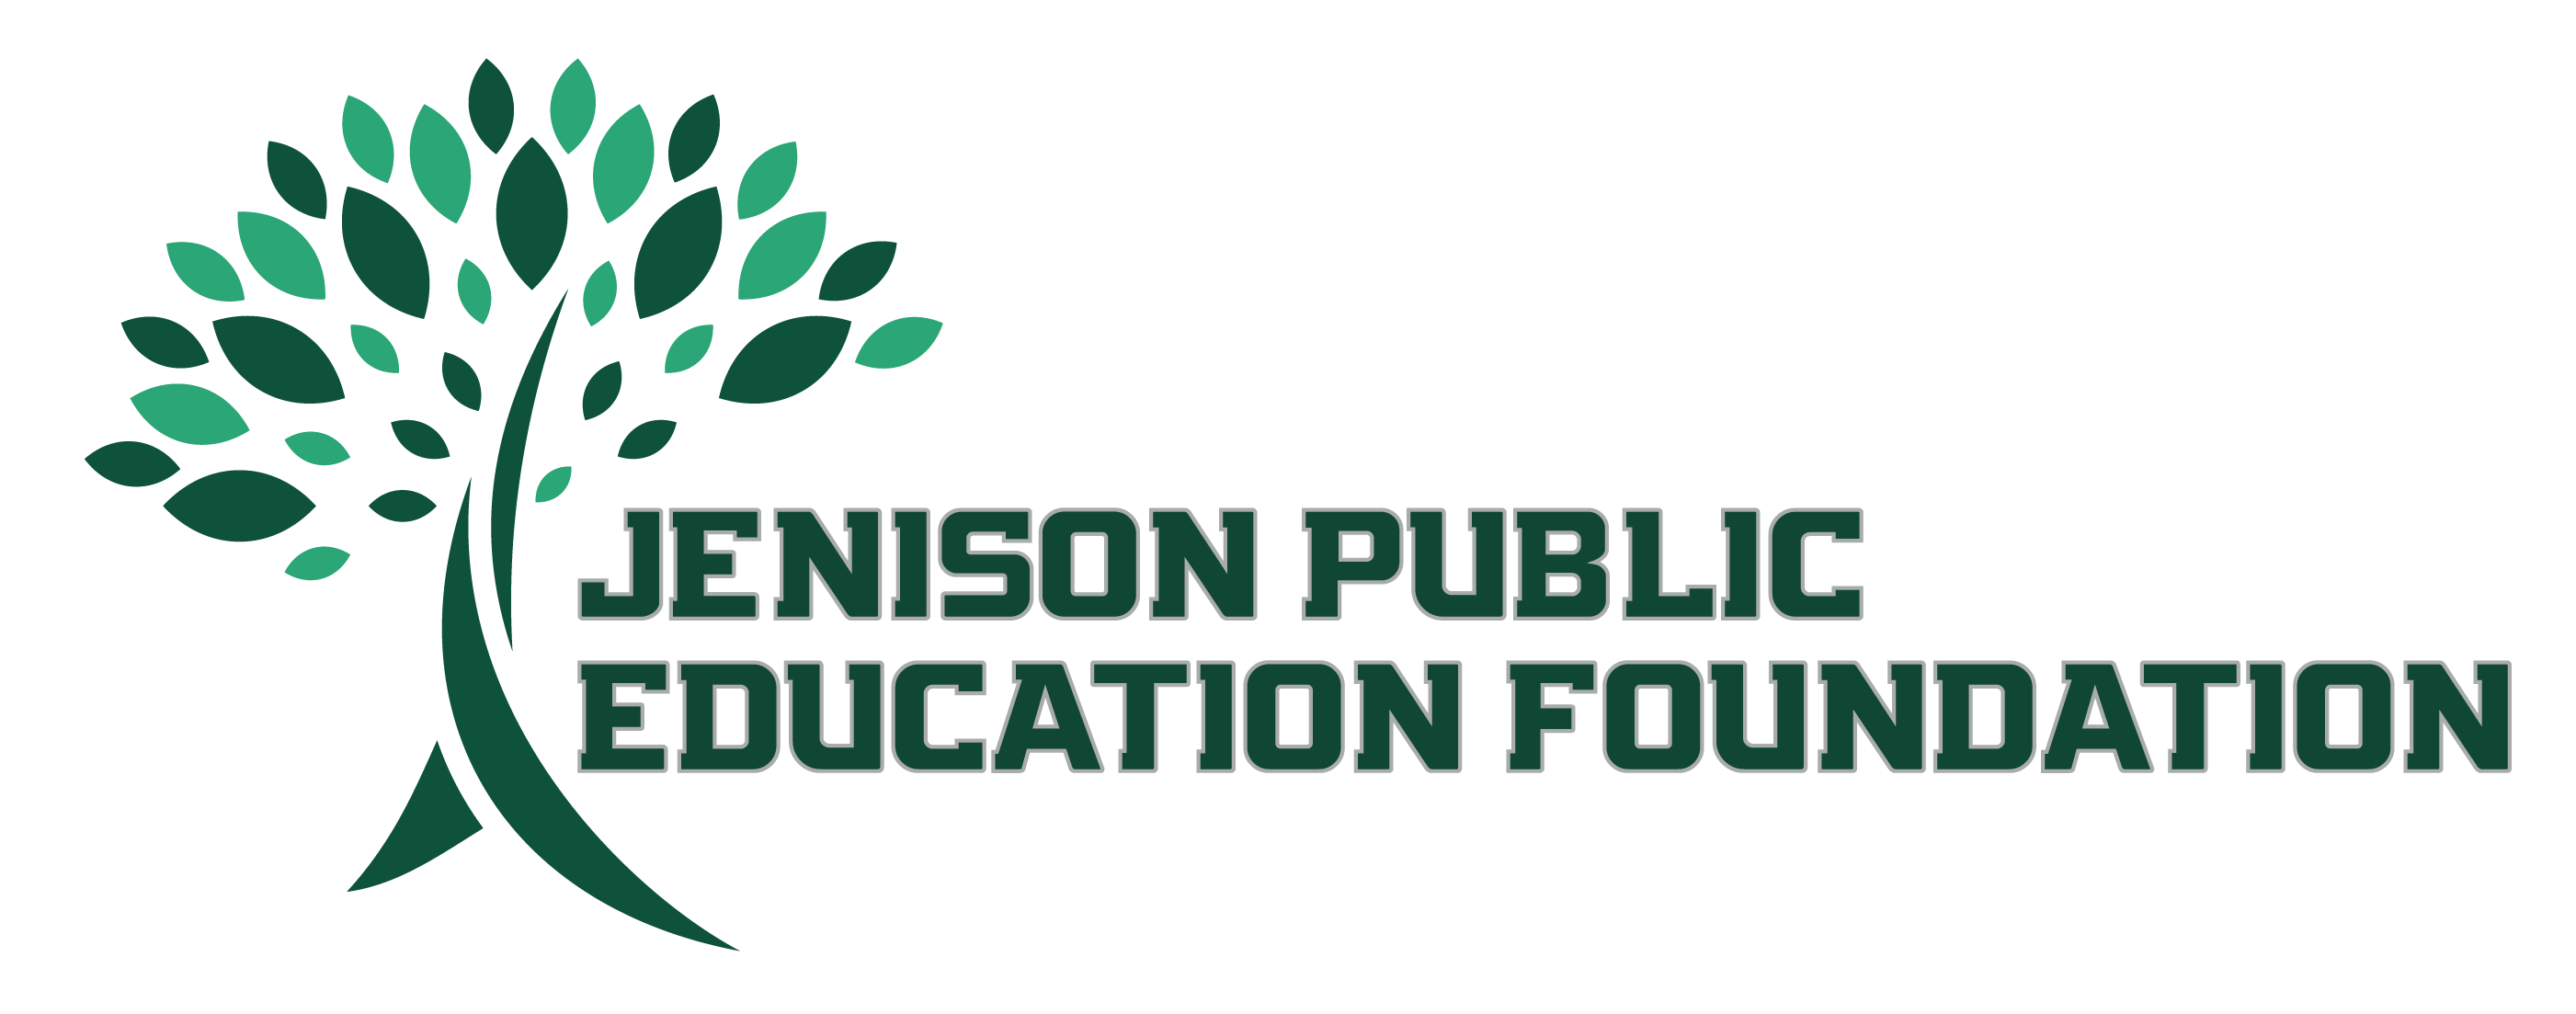 The JPEF logo consists of a green tree with "Jenison Public Education Foundation" affixed to its right.